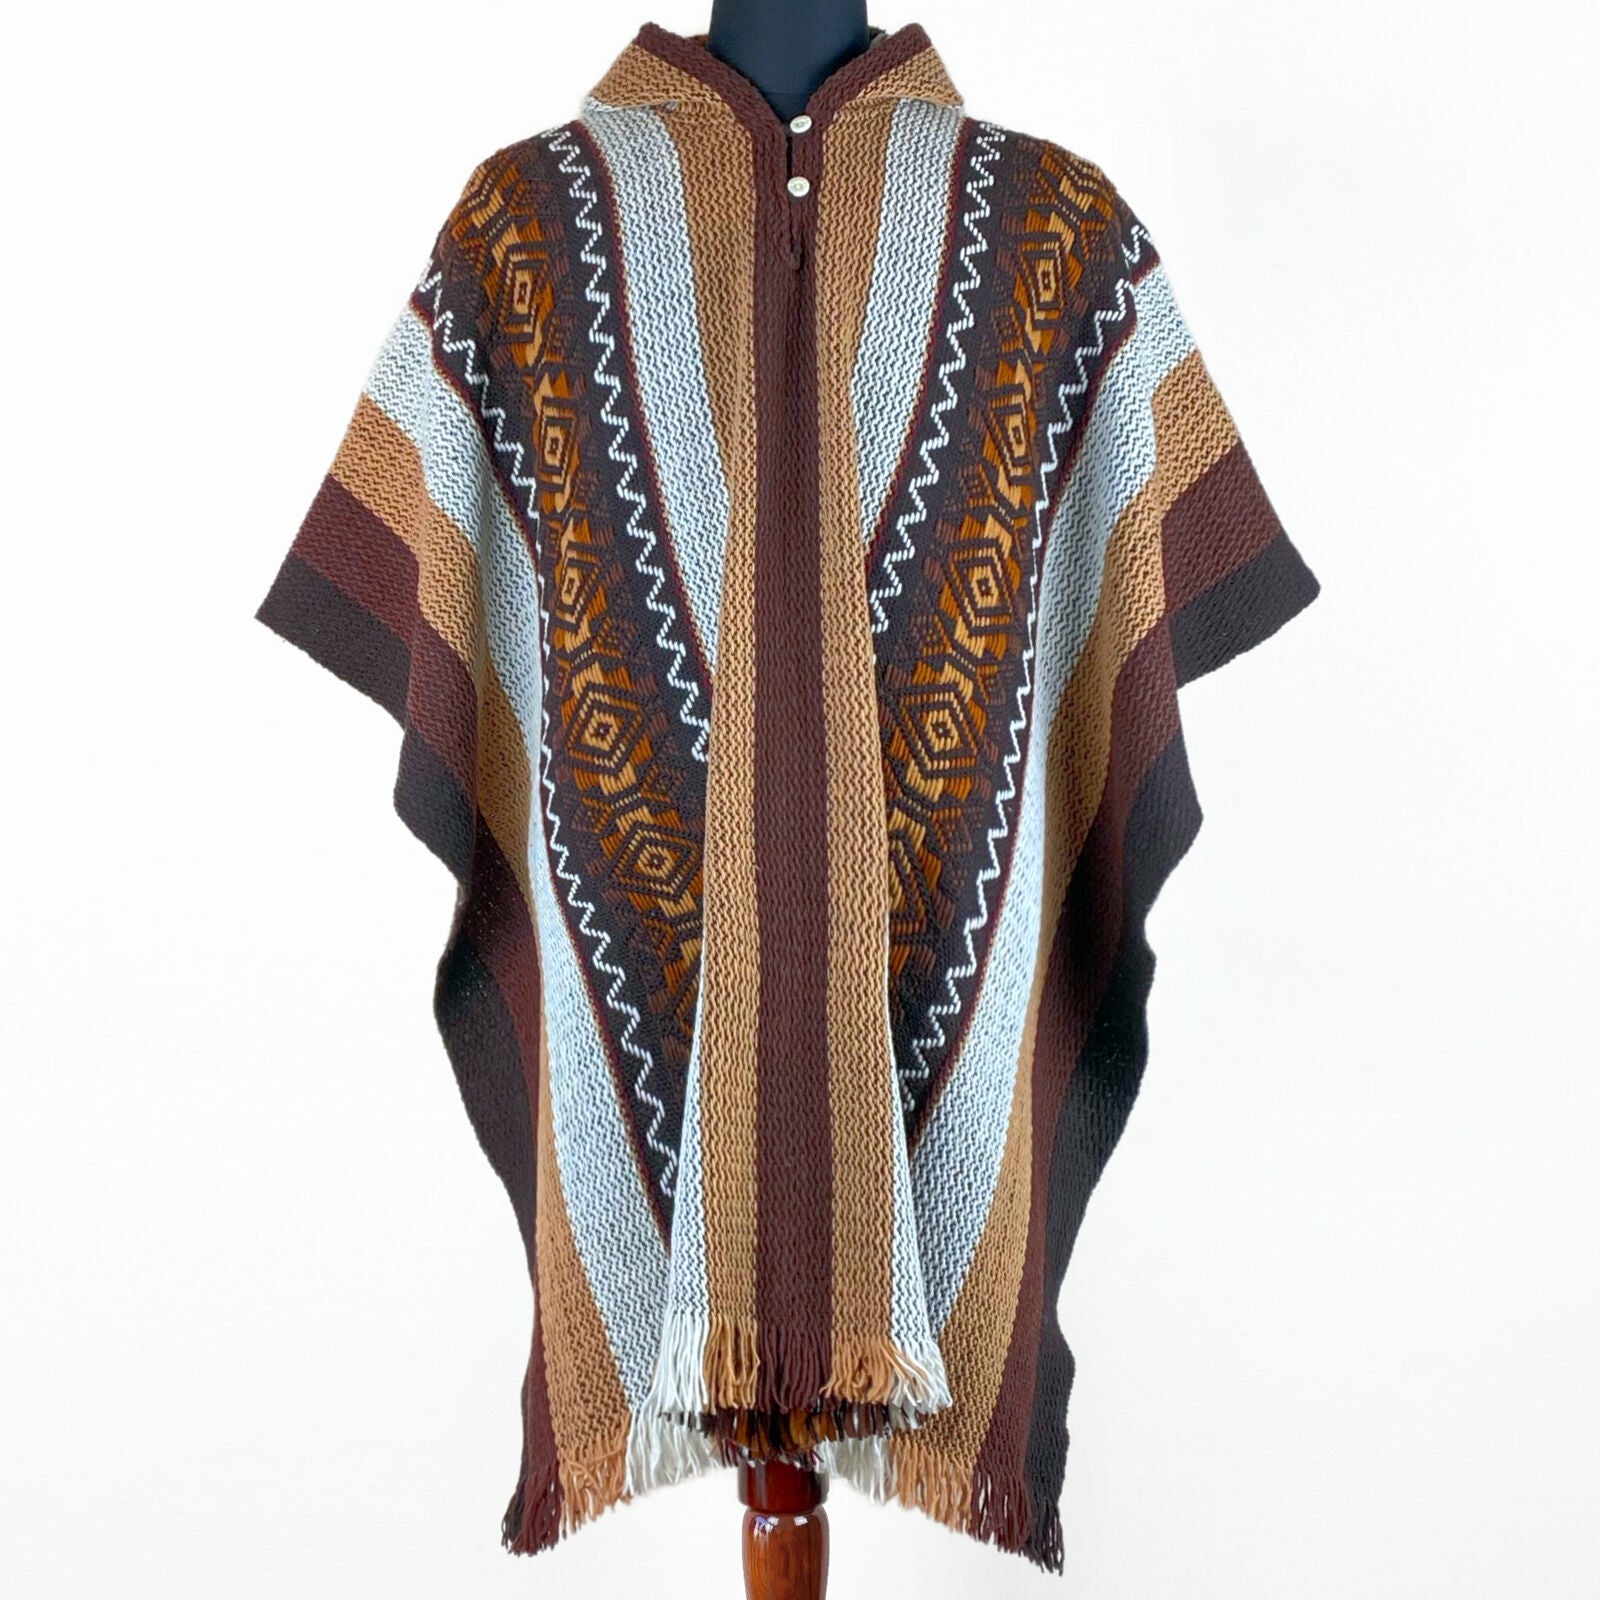 Llama Wool Unisex South American Handwoven Hooded Poncho - striped wit ...